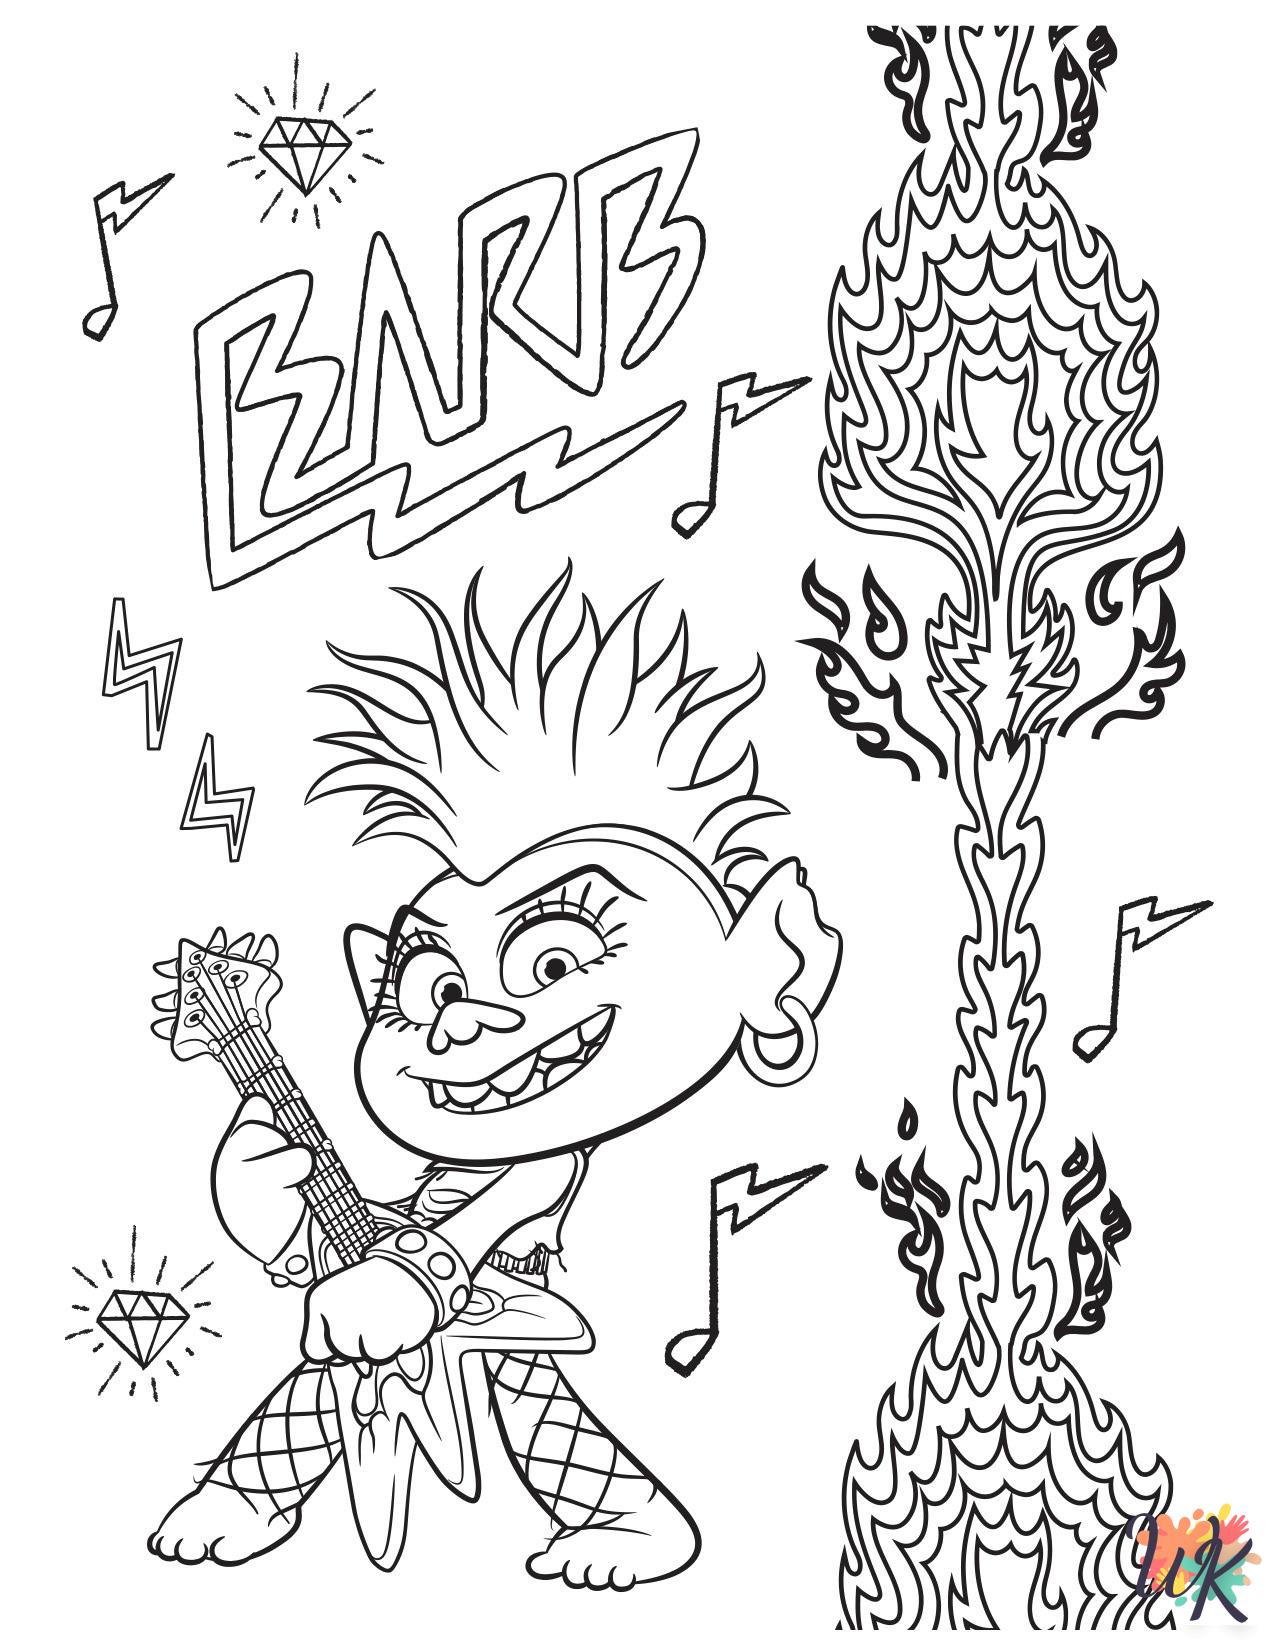 Trolls themed coloring pages